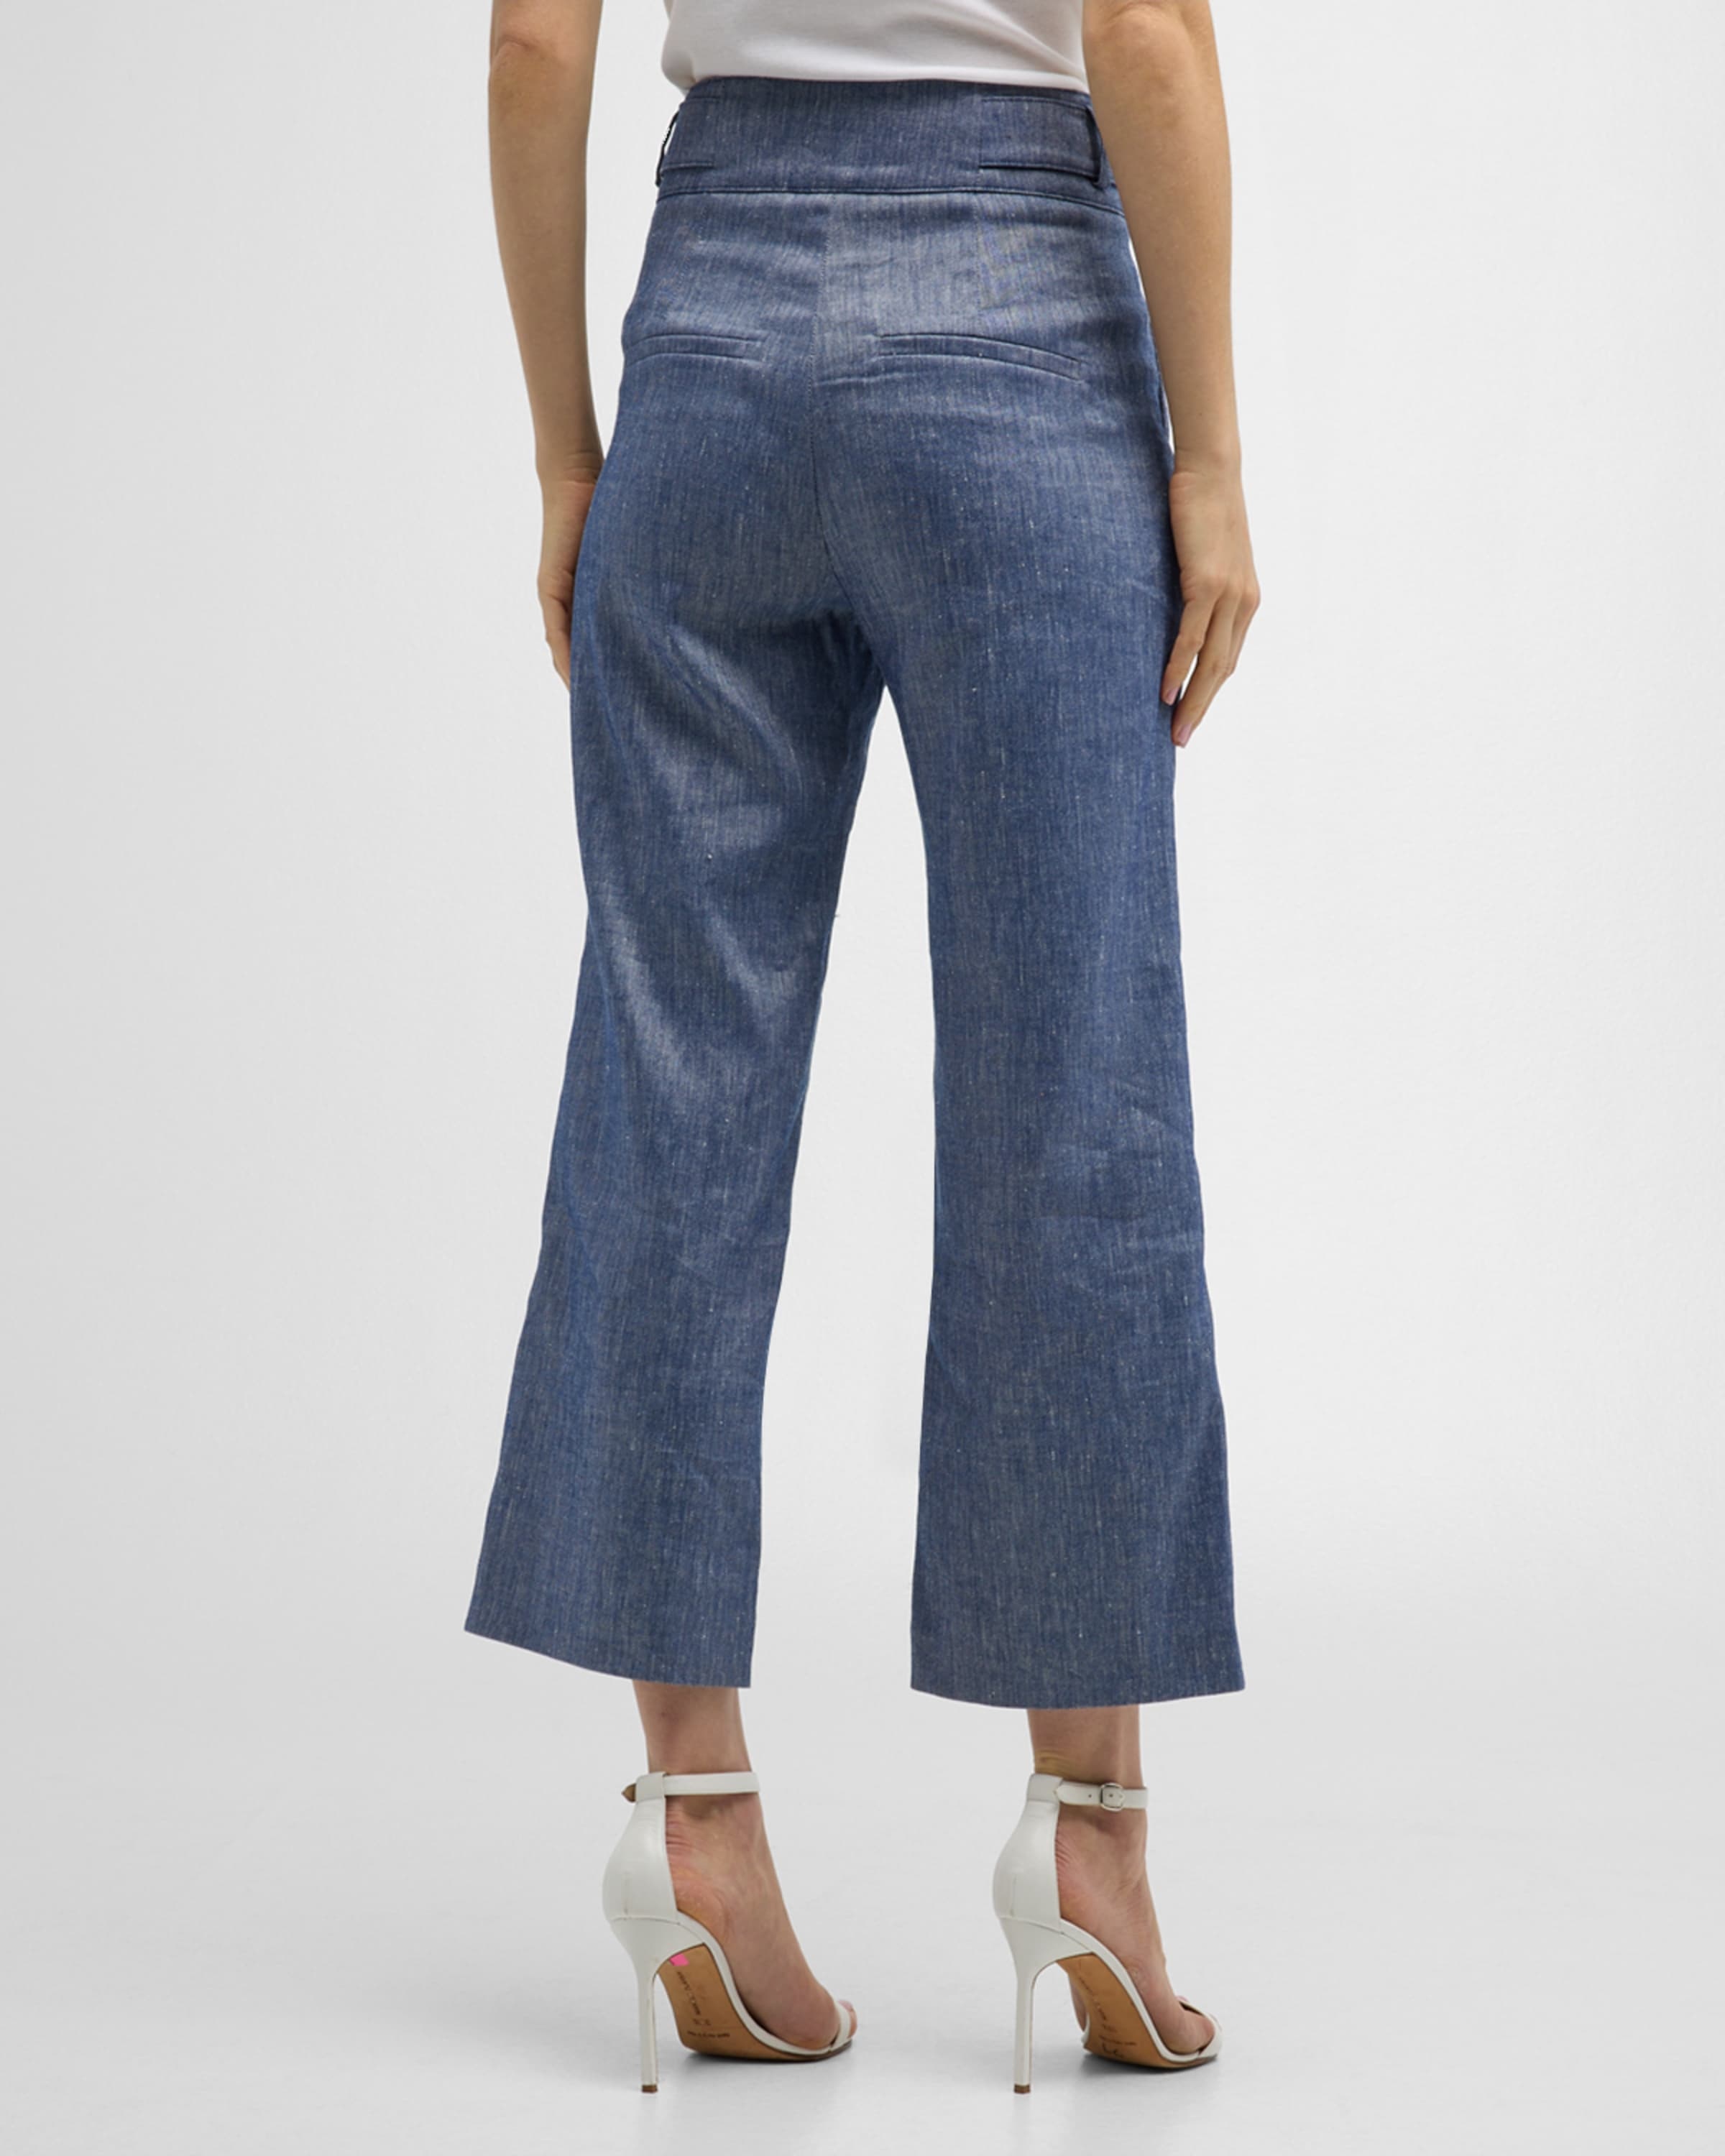 Aubrie Cropped Pants - 4